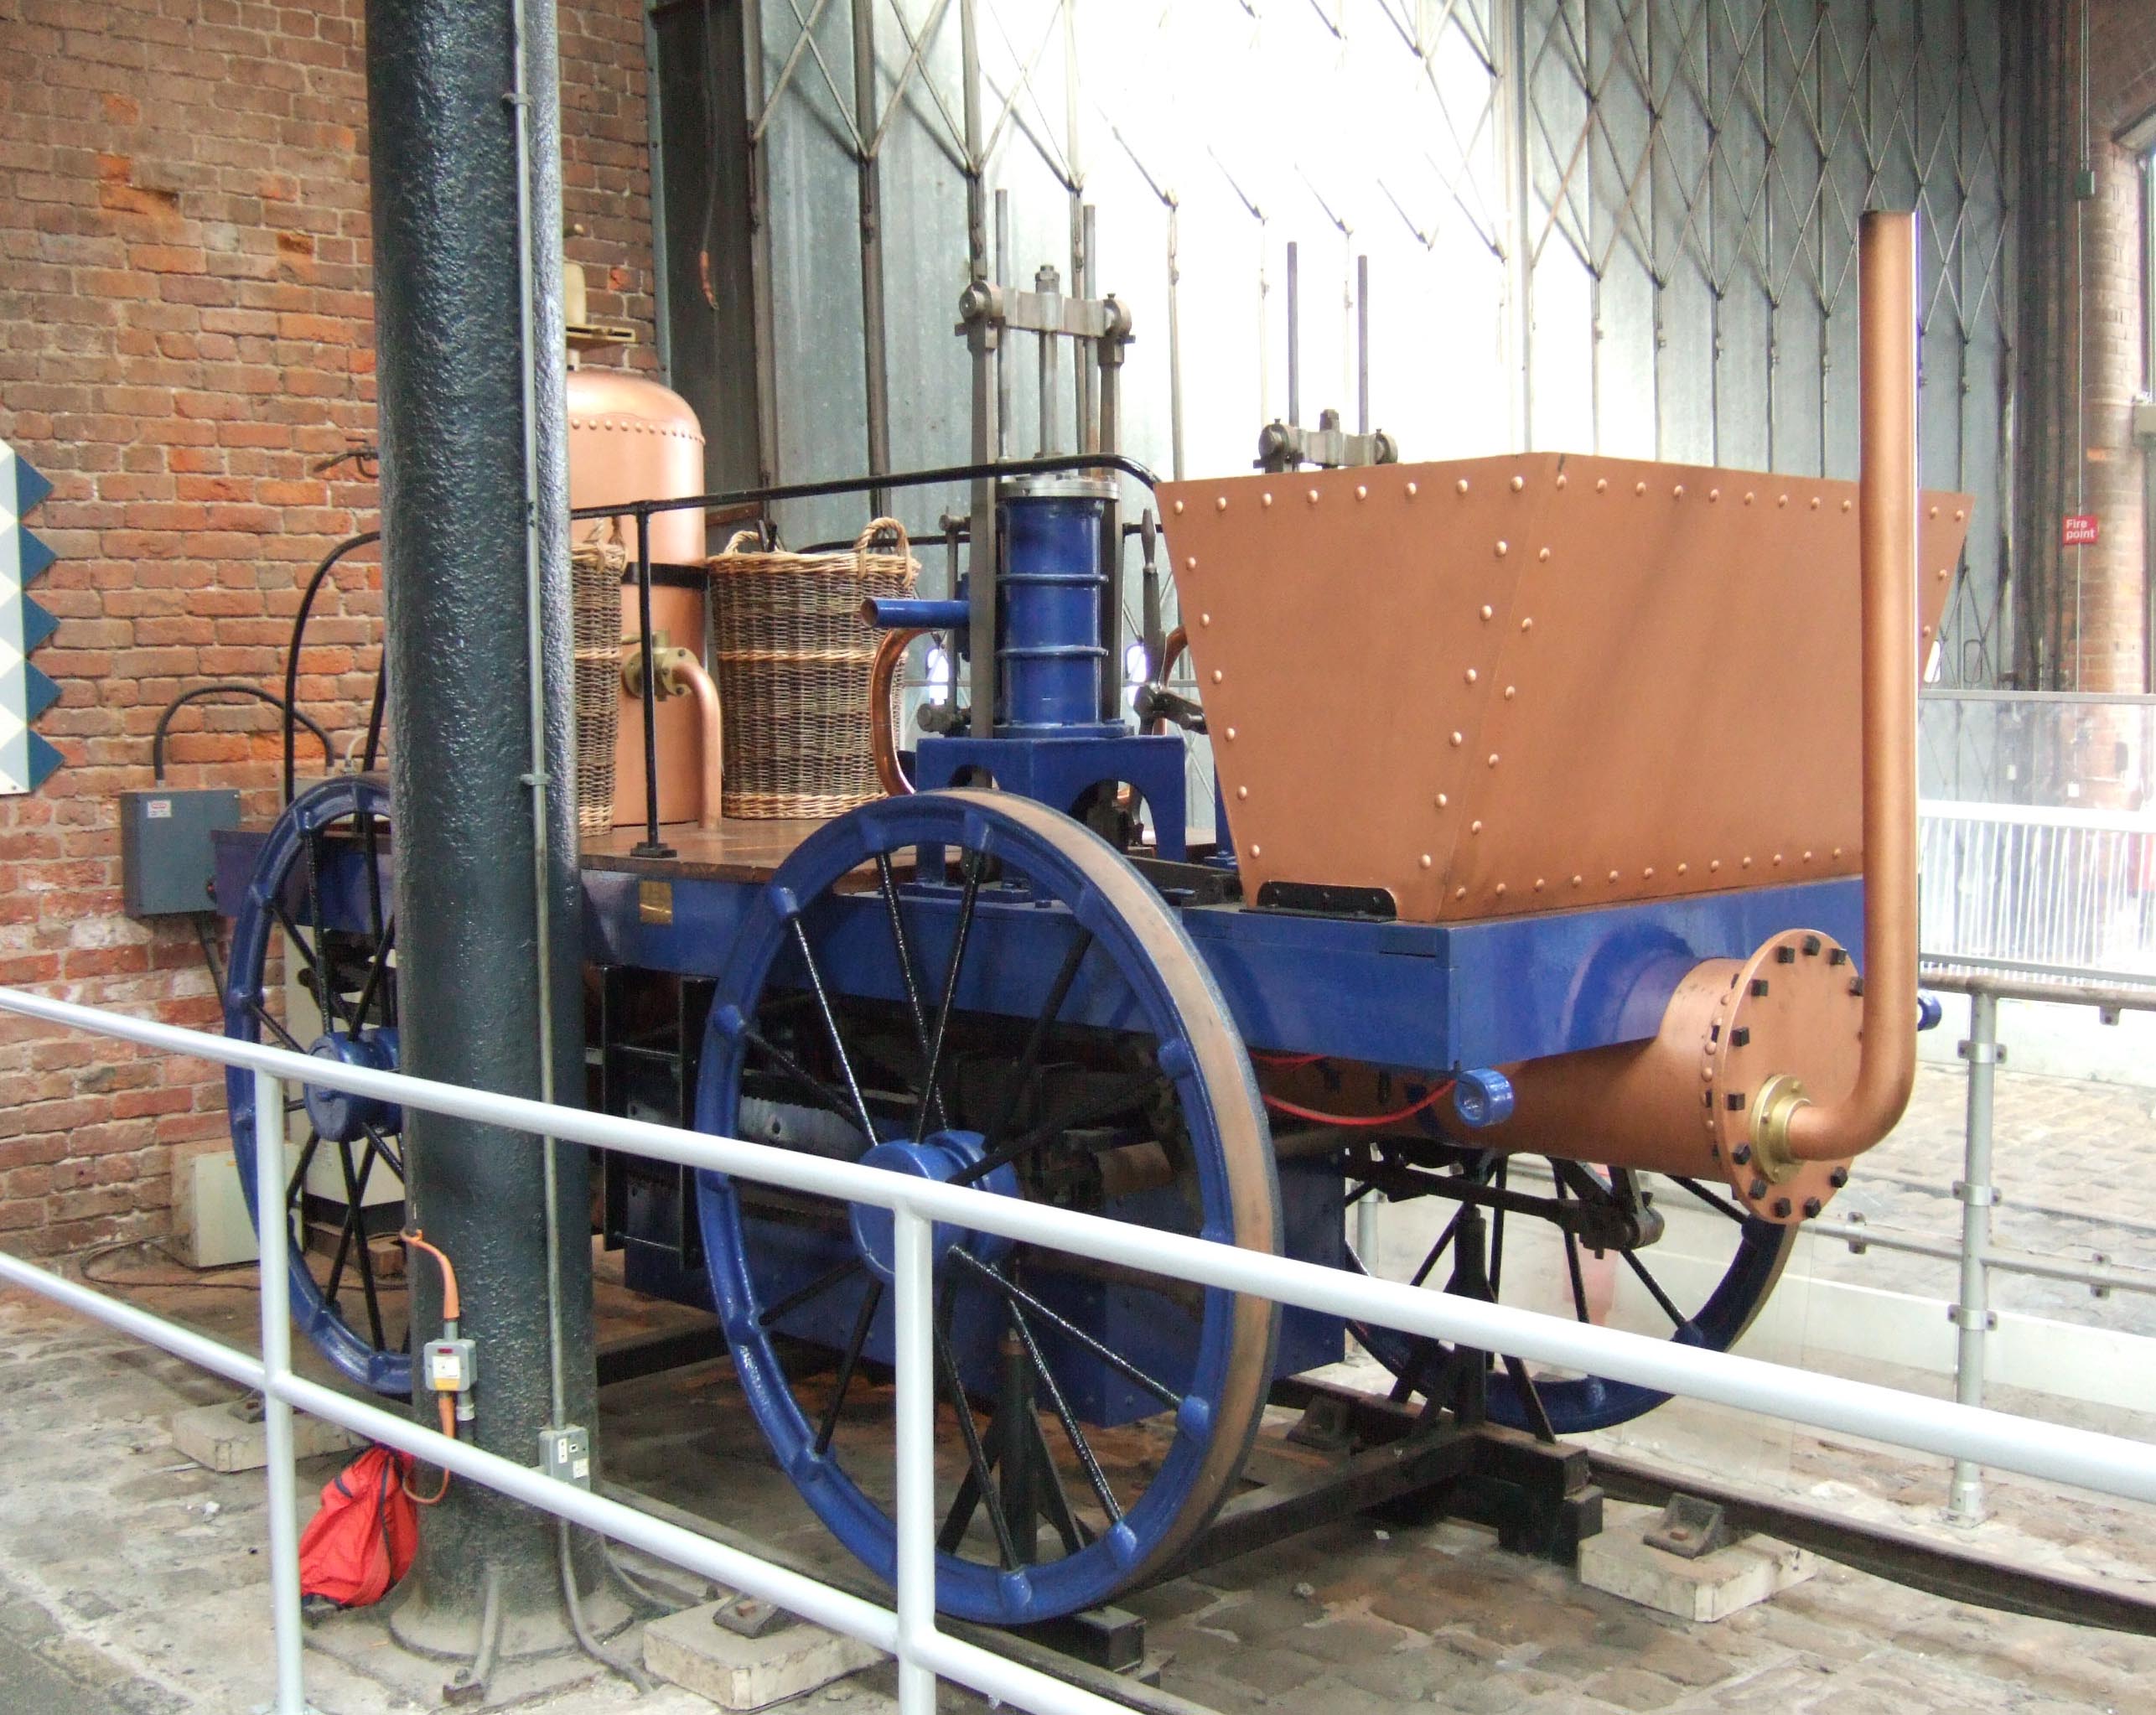 Replica of Novelty (electrically powered) on display in the Museum of Science and Industry, Manchester. The wheels are said to from the original. 17th September 2005 Photographer - A.M.Hurrell